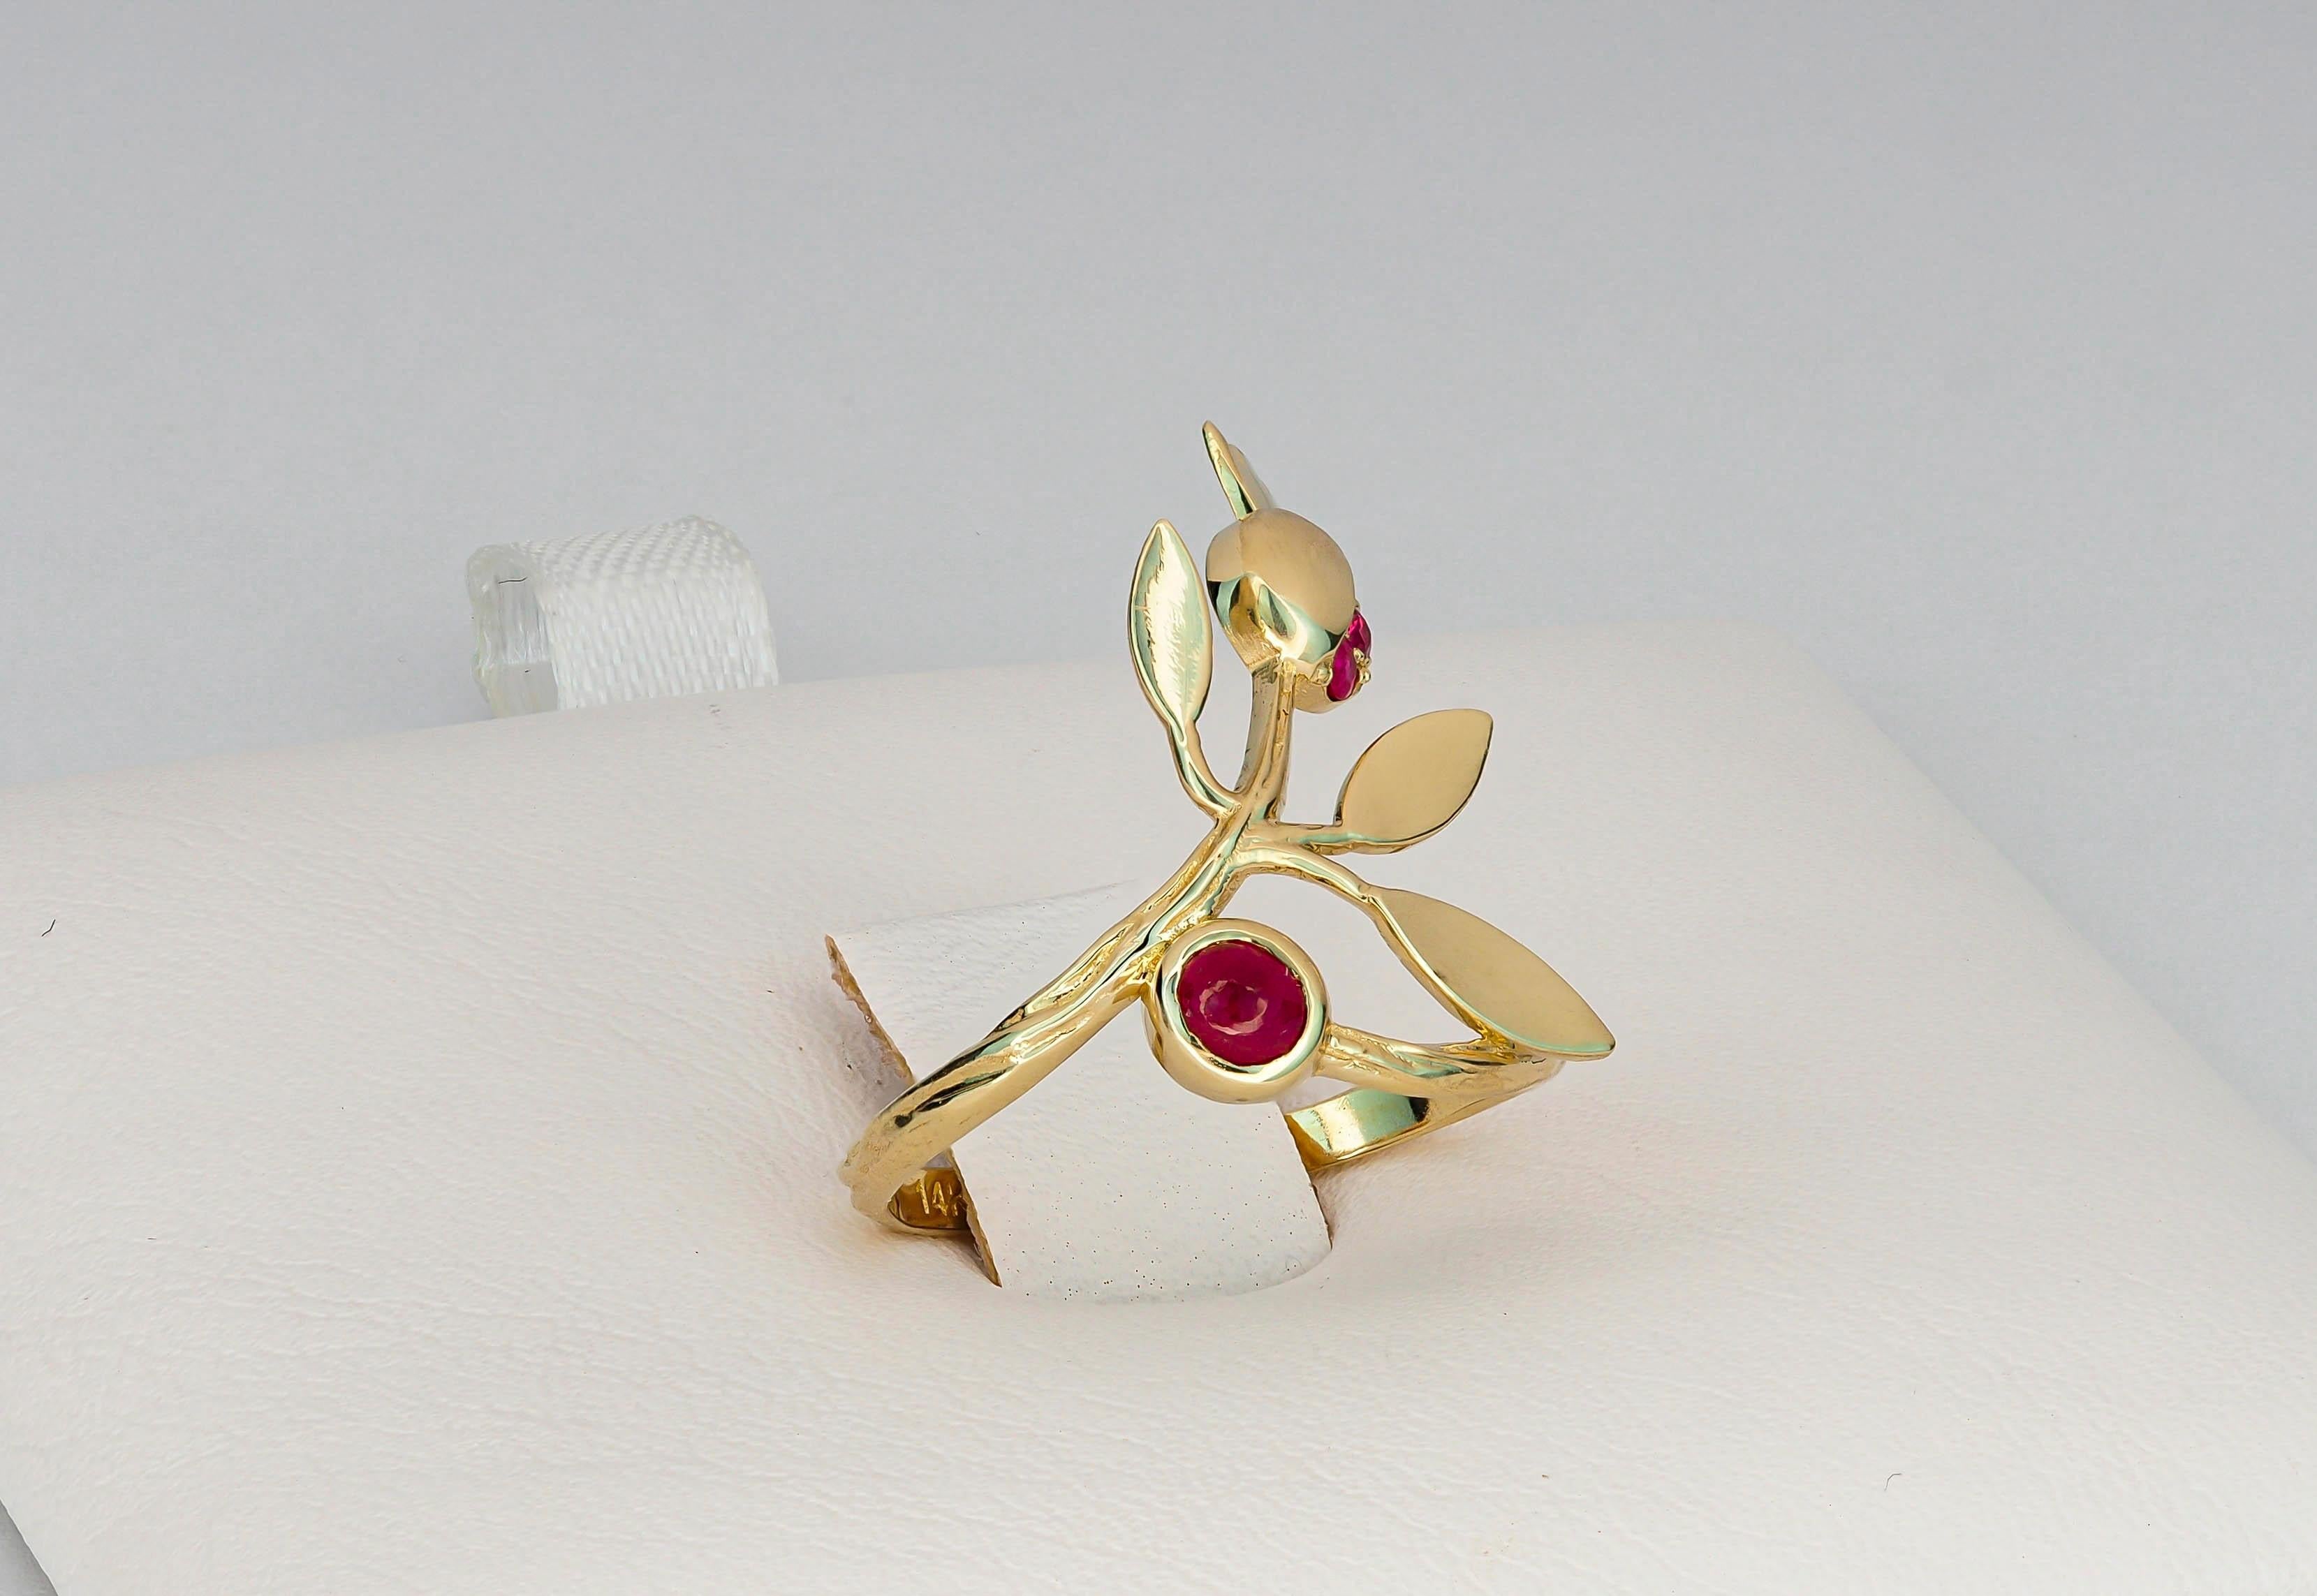 For Sale:  14 karat Gold Ring with Ruby, Sapphires. Pomegranate ring. July birthstone ring! 2